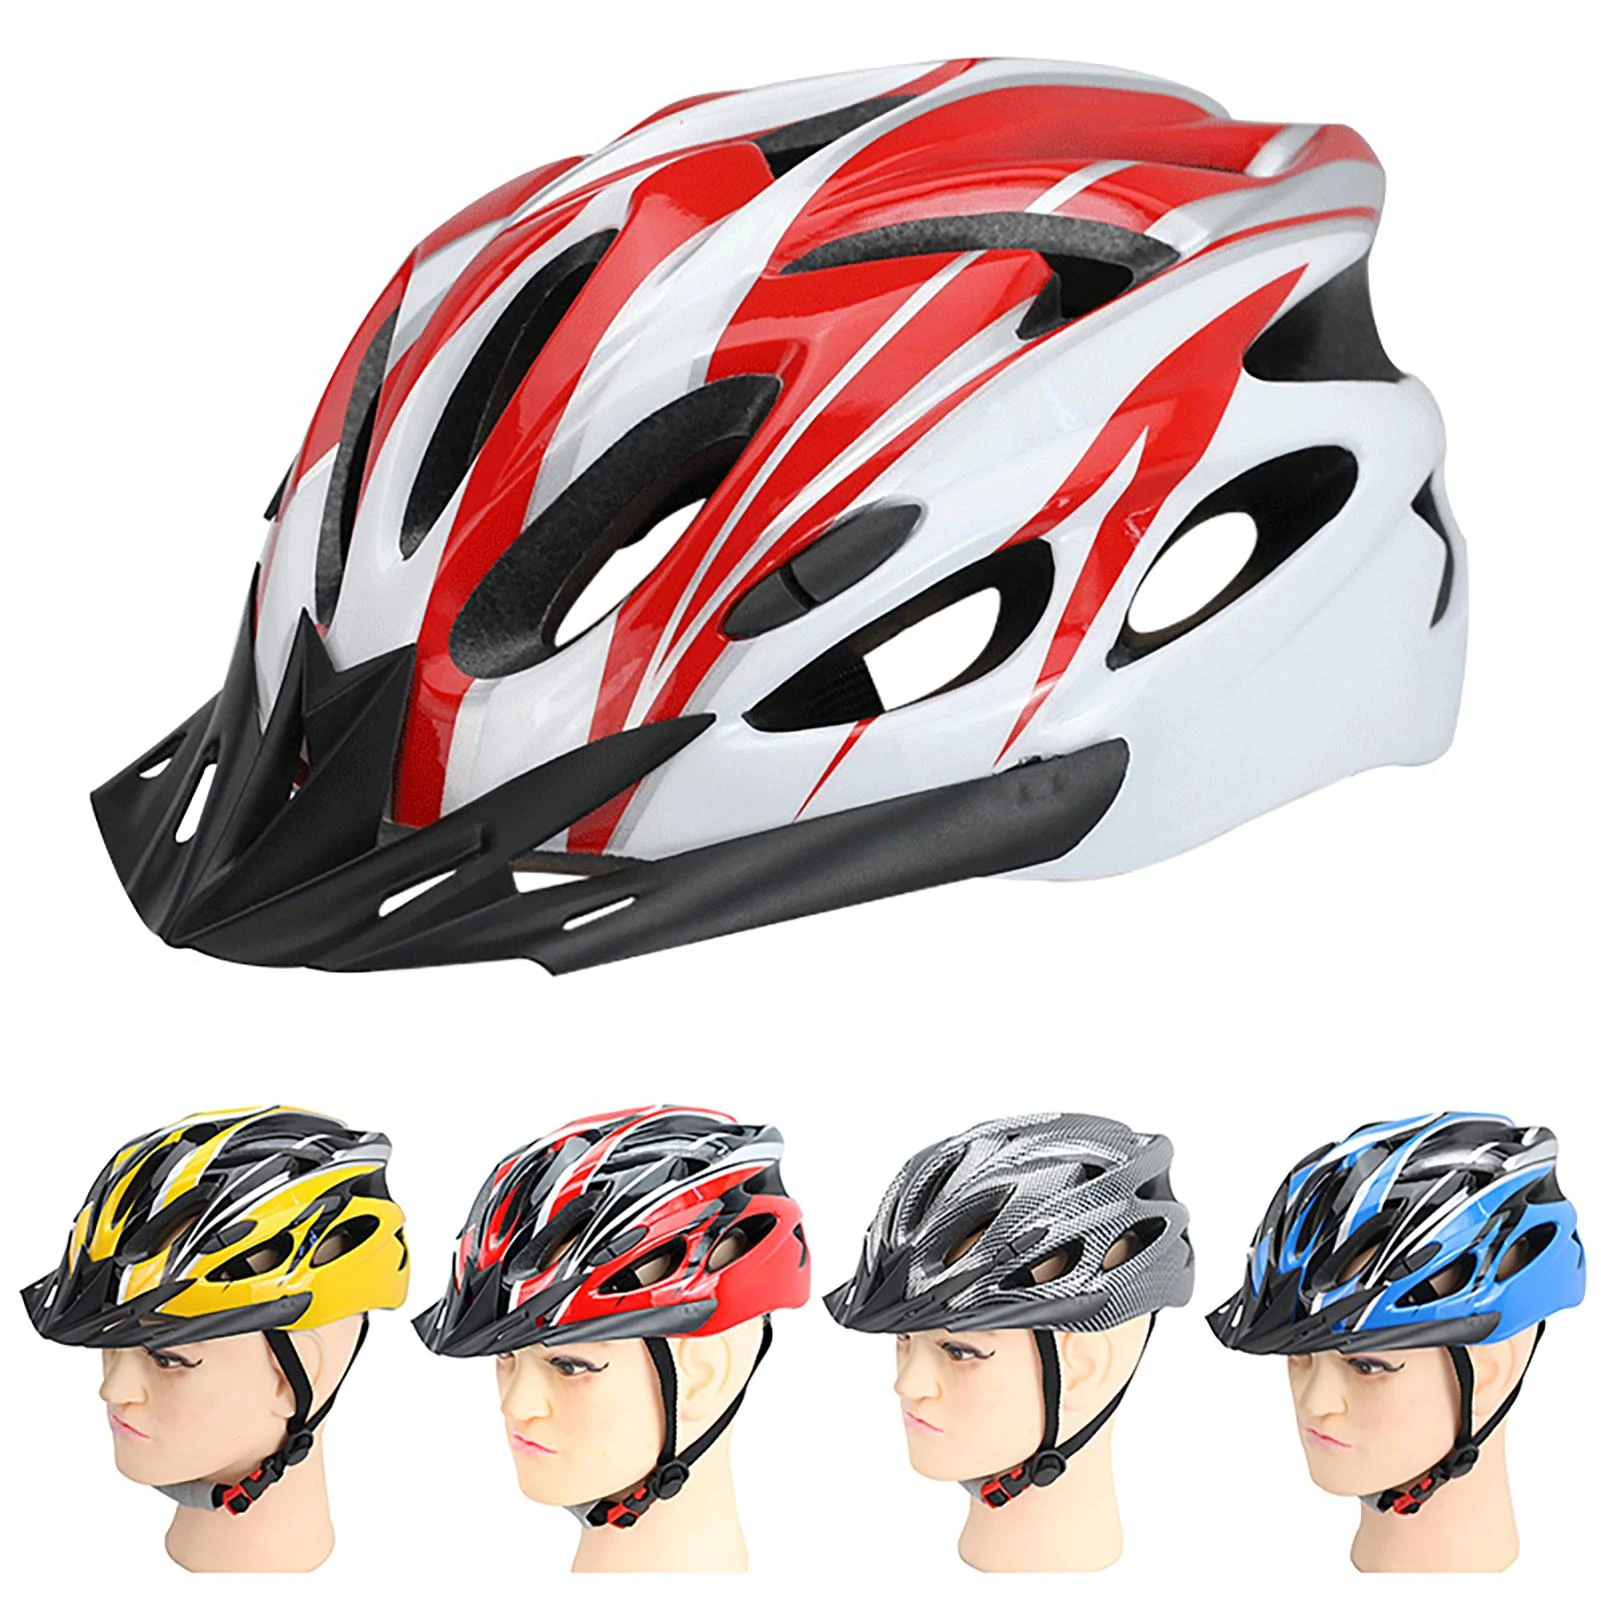 MTB Road Bicycle Helmet Mountain Bike Cycling Sports Safety Helmet with Goggles